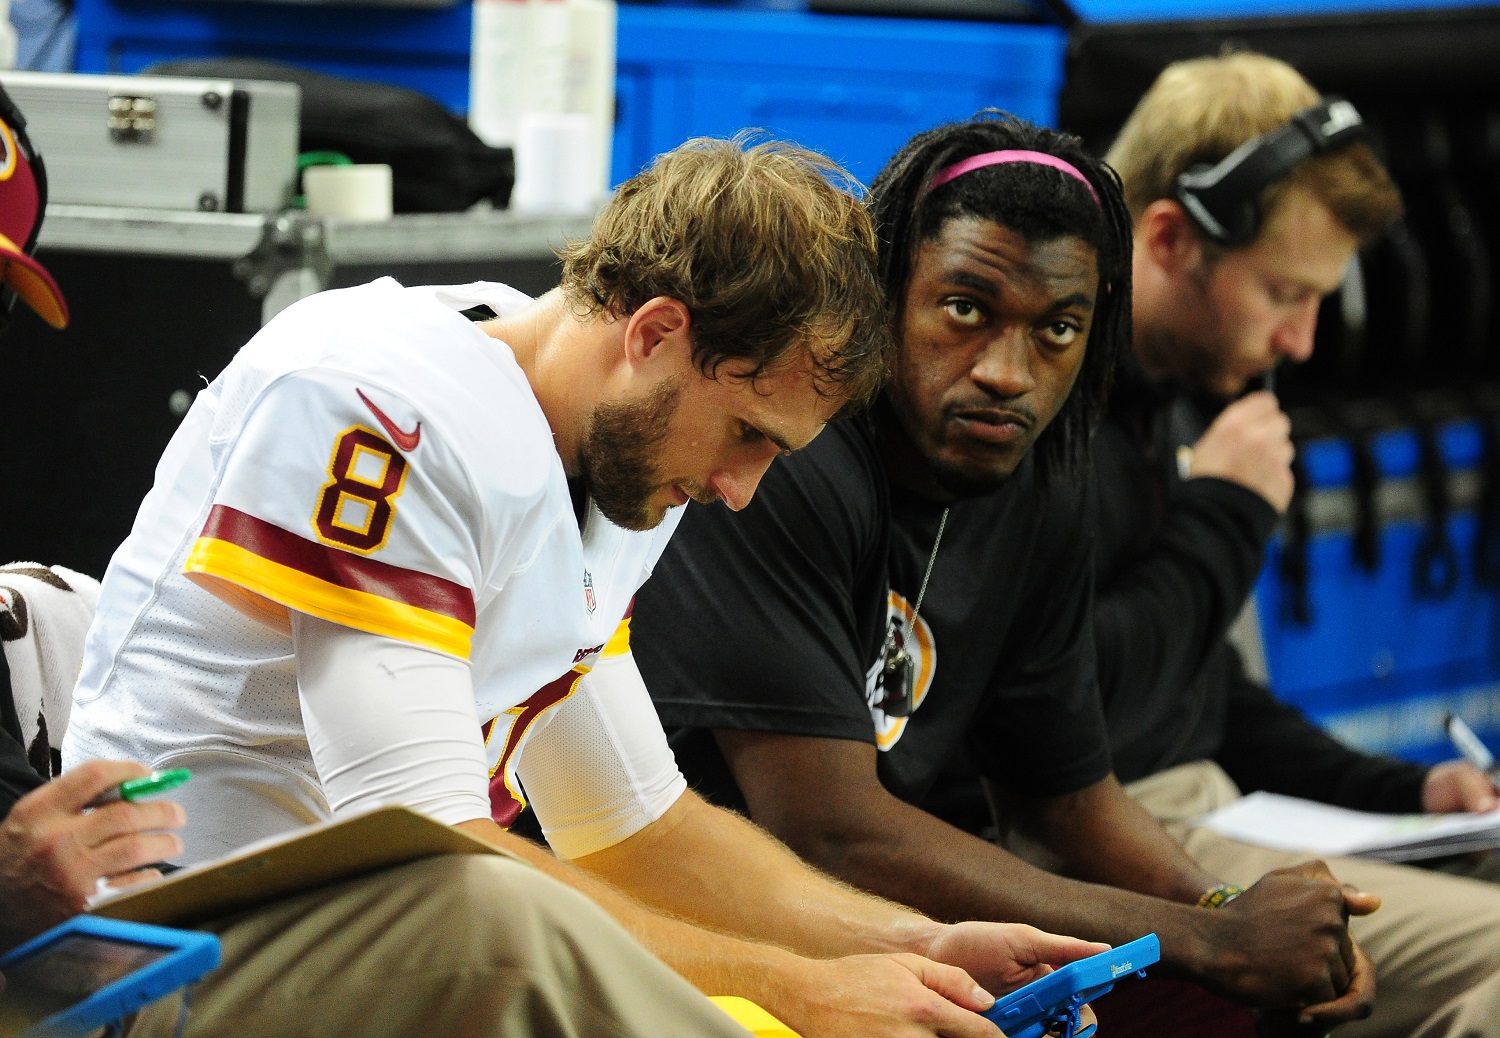 Where does RG3 go from here?